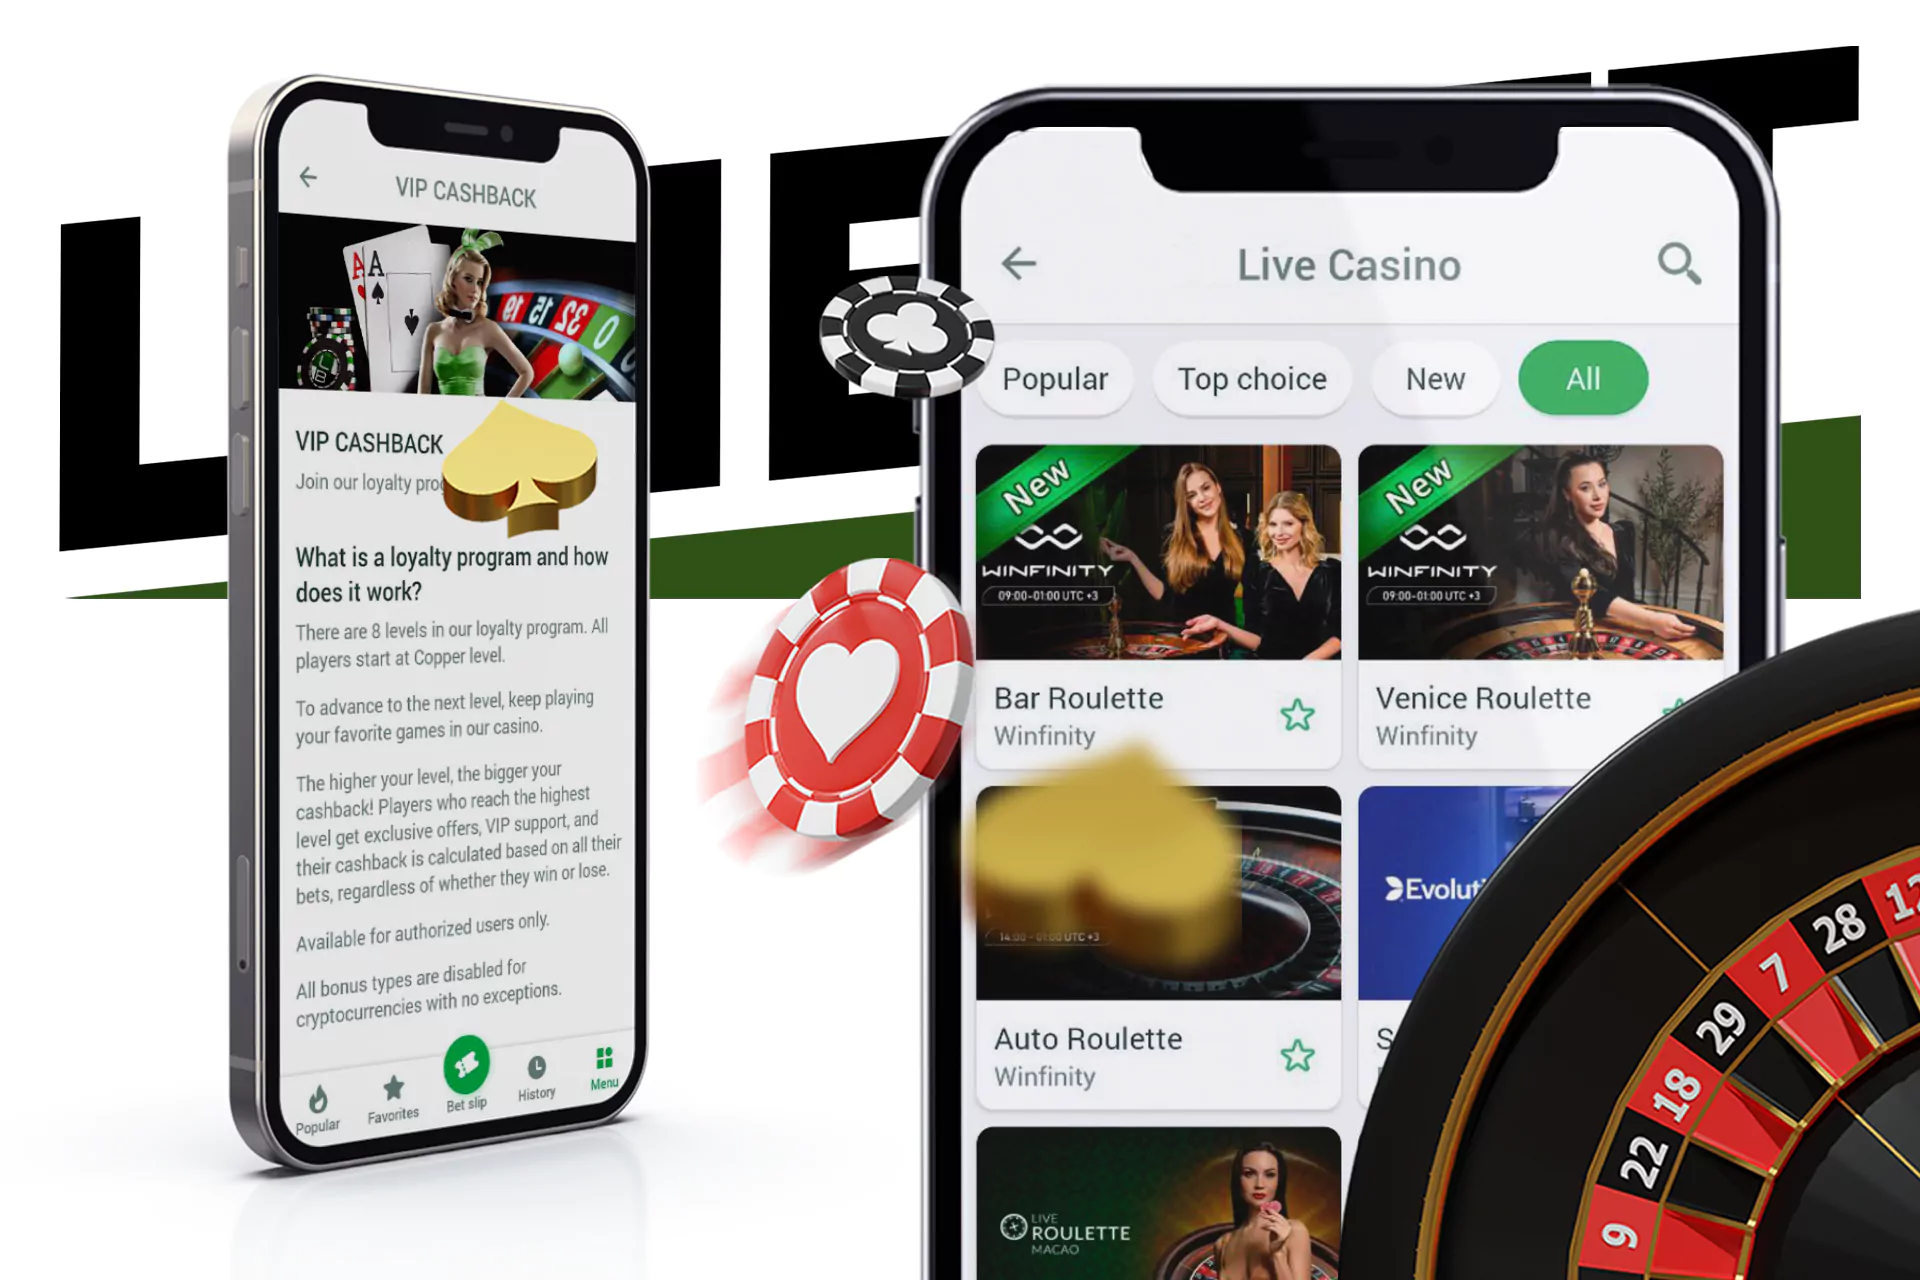 In the Linebet app, you can play casino games.